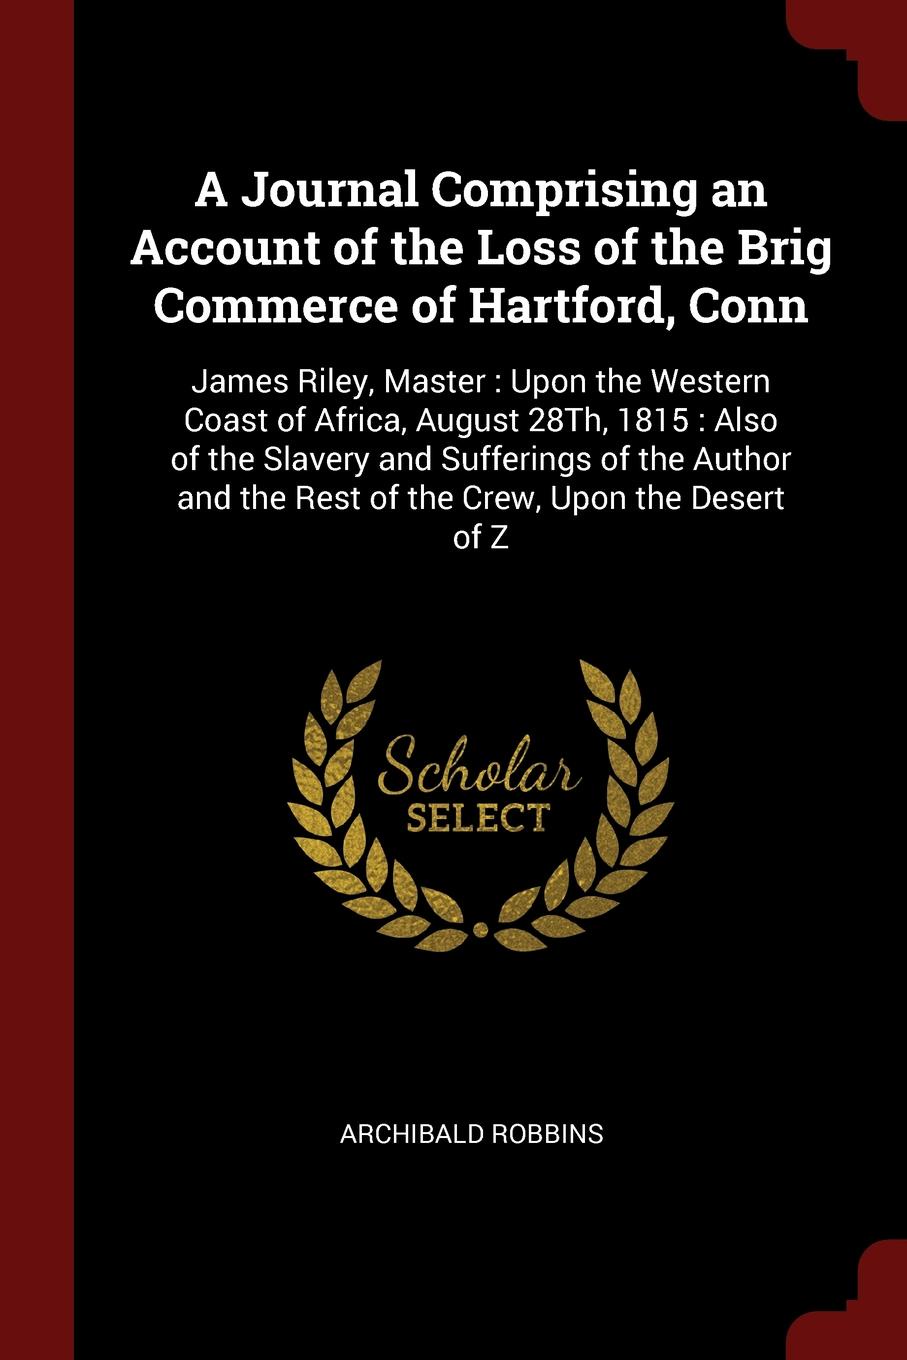 A Journal Comprising an Account of the Loss of the Brig Commerce of Hartford, Conn. James Riley, Master : Upon the Western Coast of Africa, August 28Th, 1815 : Also of the Slavery and Sufferings of the Author and the Rest of the Crew, Upon the Des...